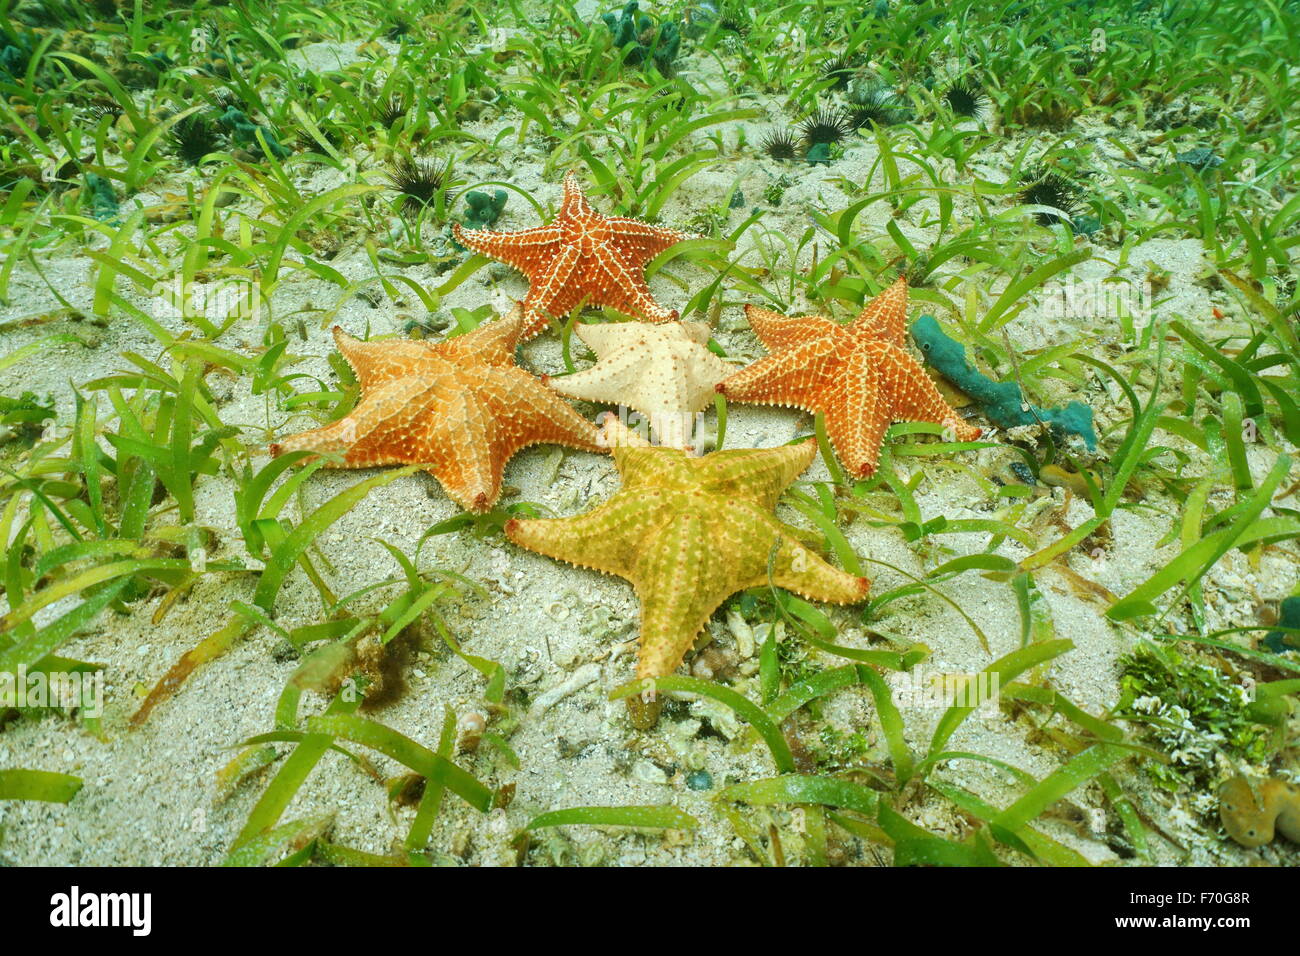 Five Cushion starfish underwater with different colors on ocean floor with sand and sea grass, Atlantic ocean, Bahamas Stock Photo